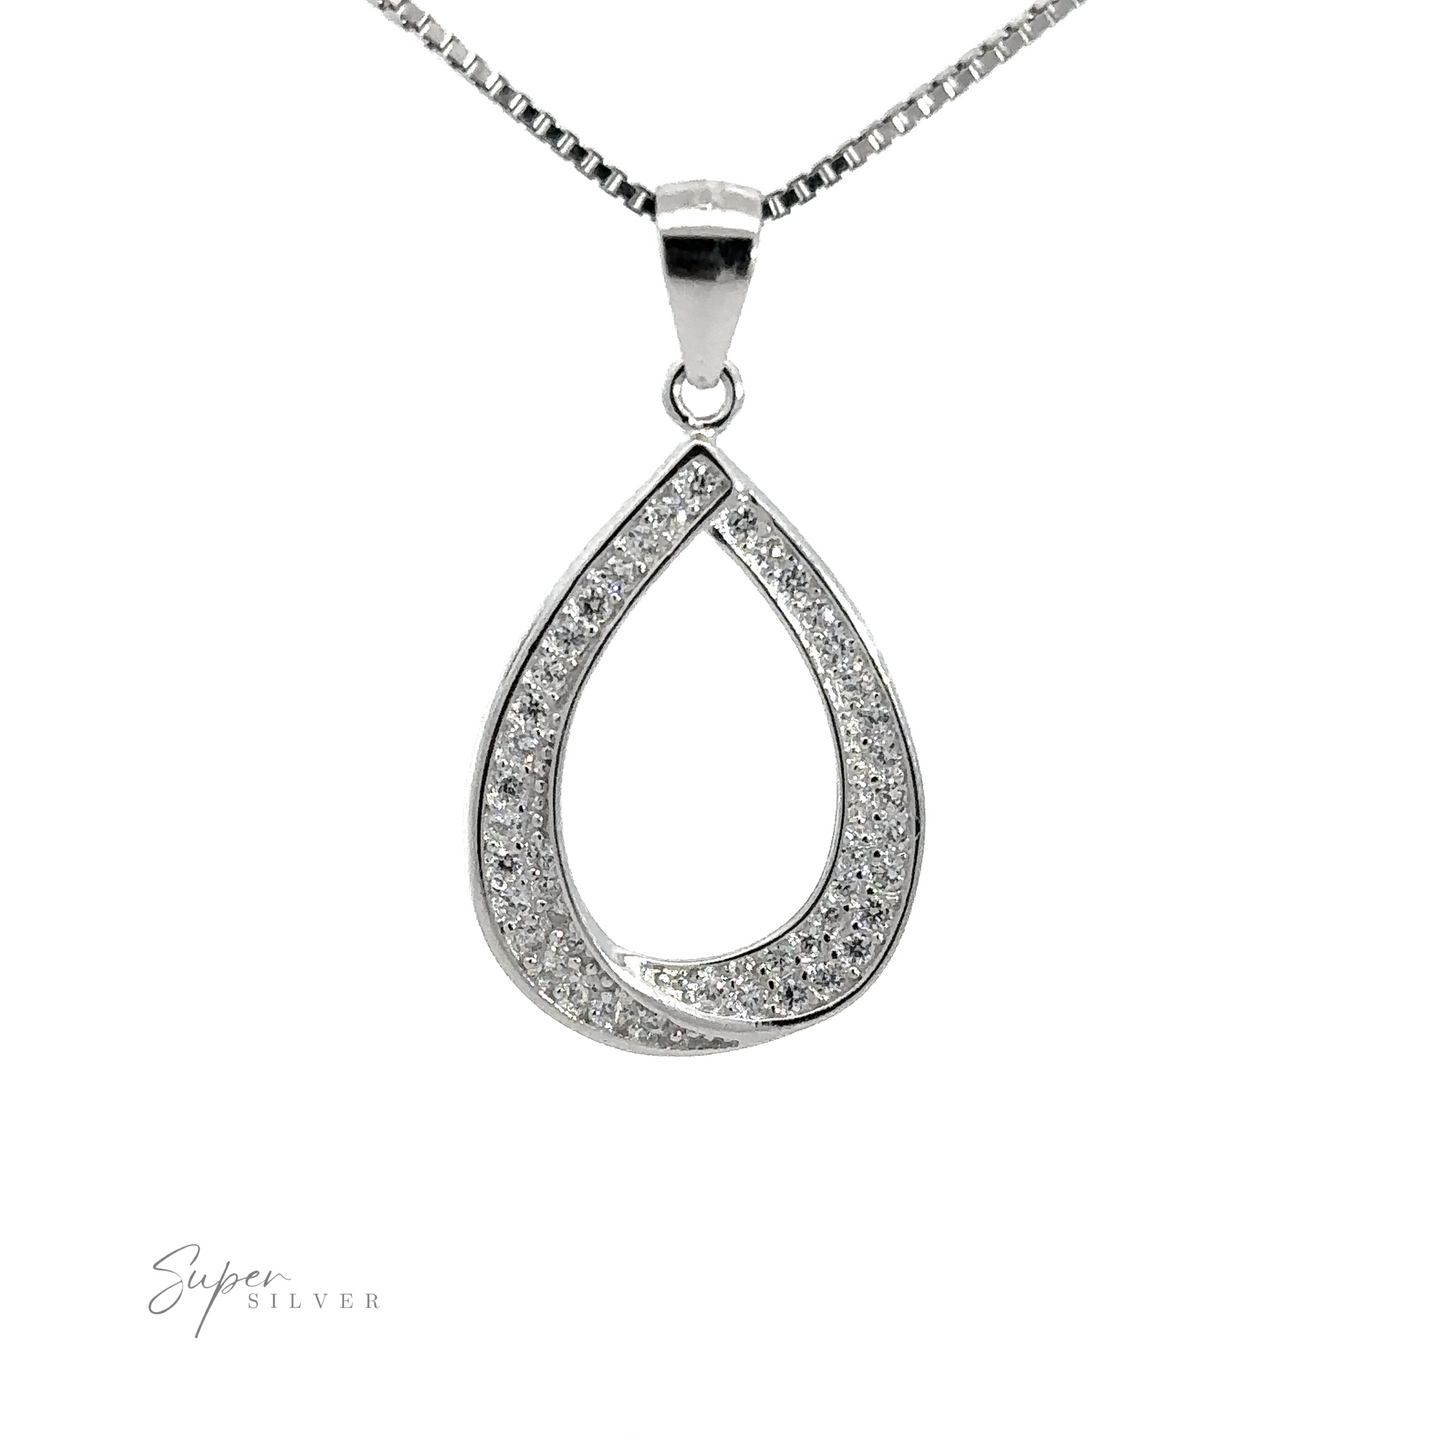 Close-up image of a Teardrop Shape Cubic Zirconia Pendant, hanging from a rhodium-plated silver chain. The brand name "Super Silver" is visible at the bottom left corner.